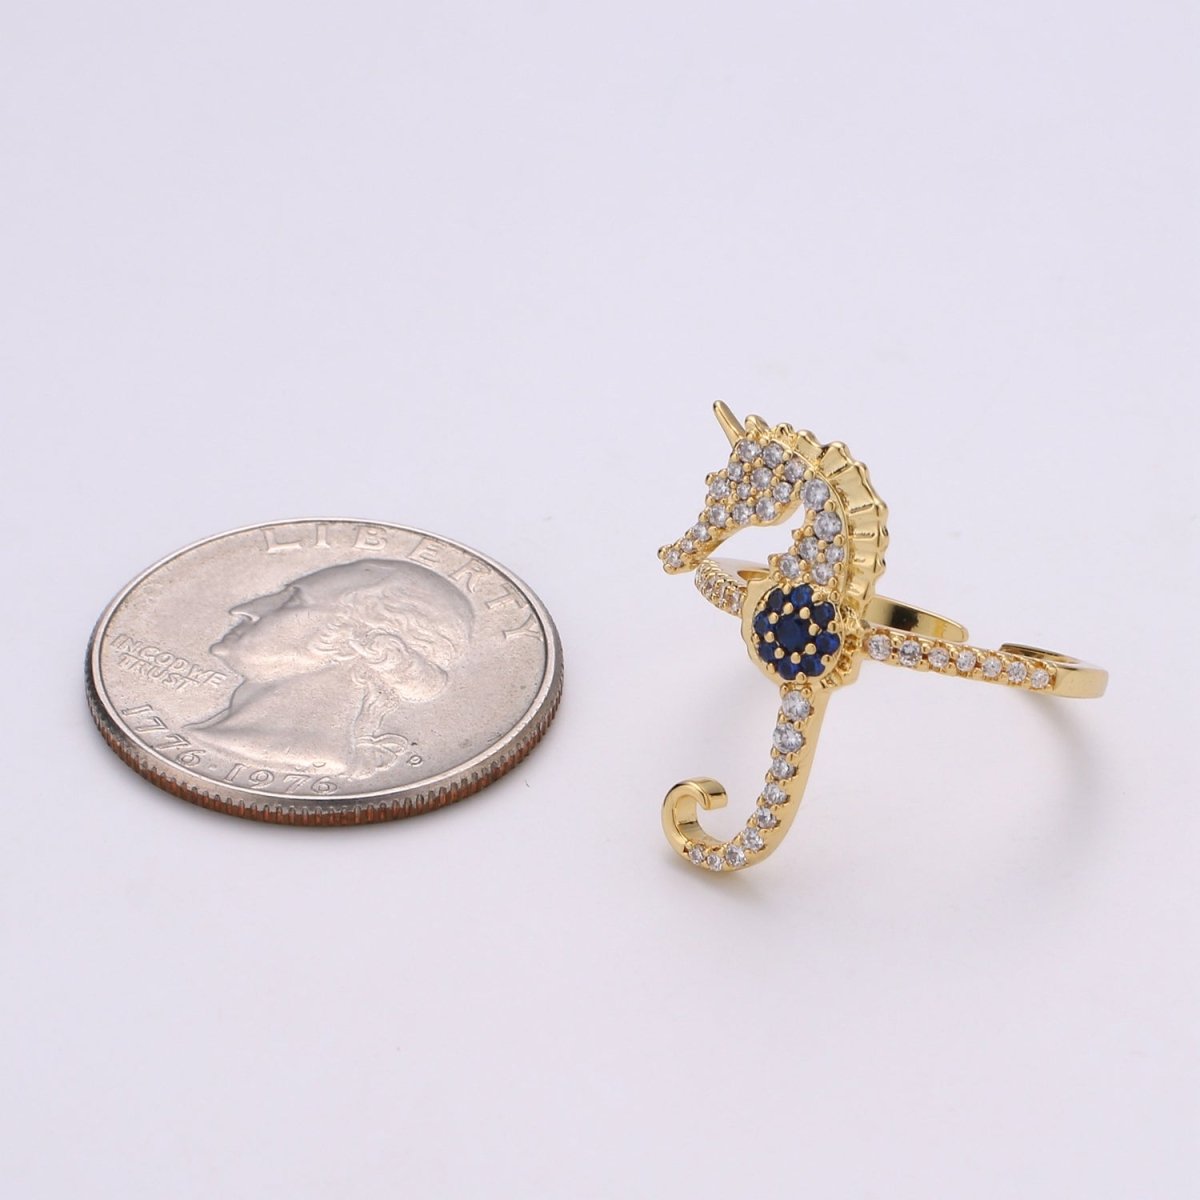 Cz Sea horse ring, Gold seahorse ring, stackable Animal ring Under the Sea Jewelry Inspired Accessory R-196 - DLUXCA